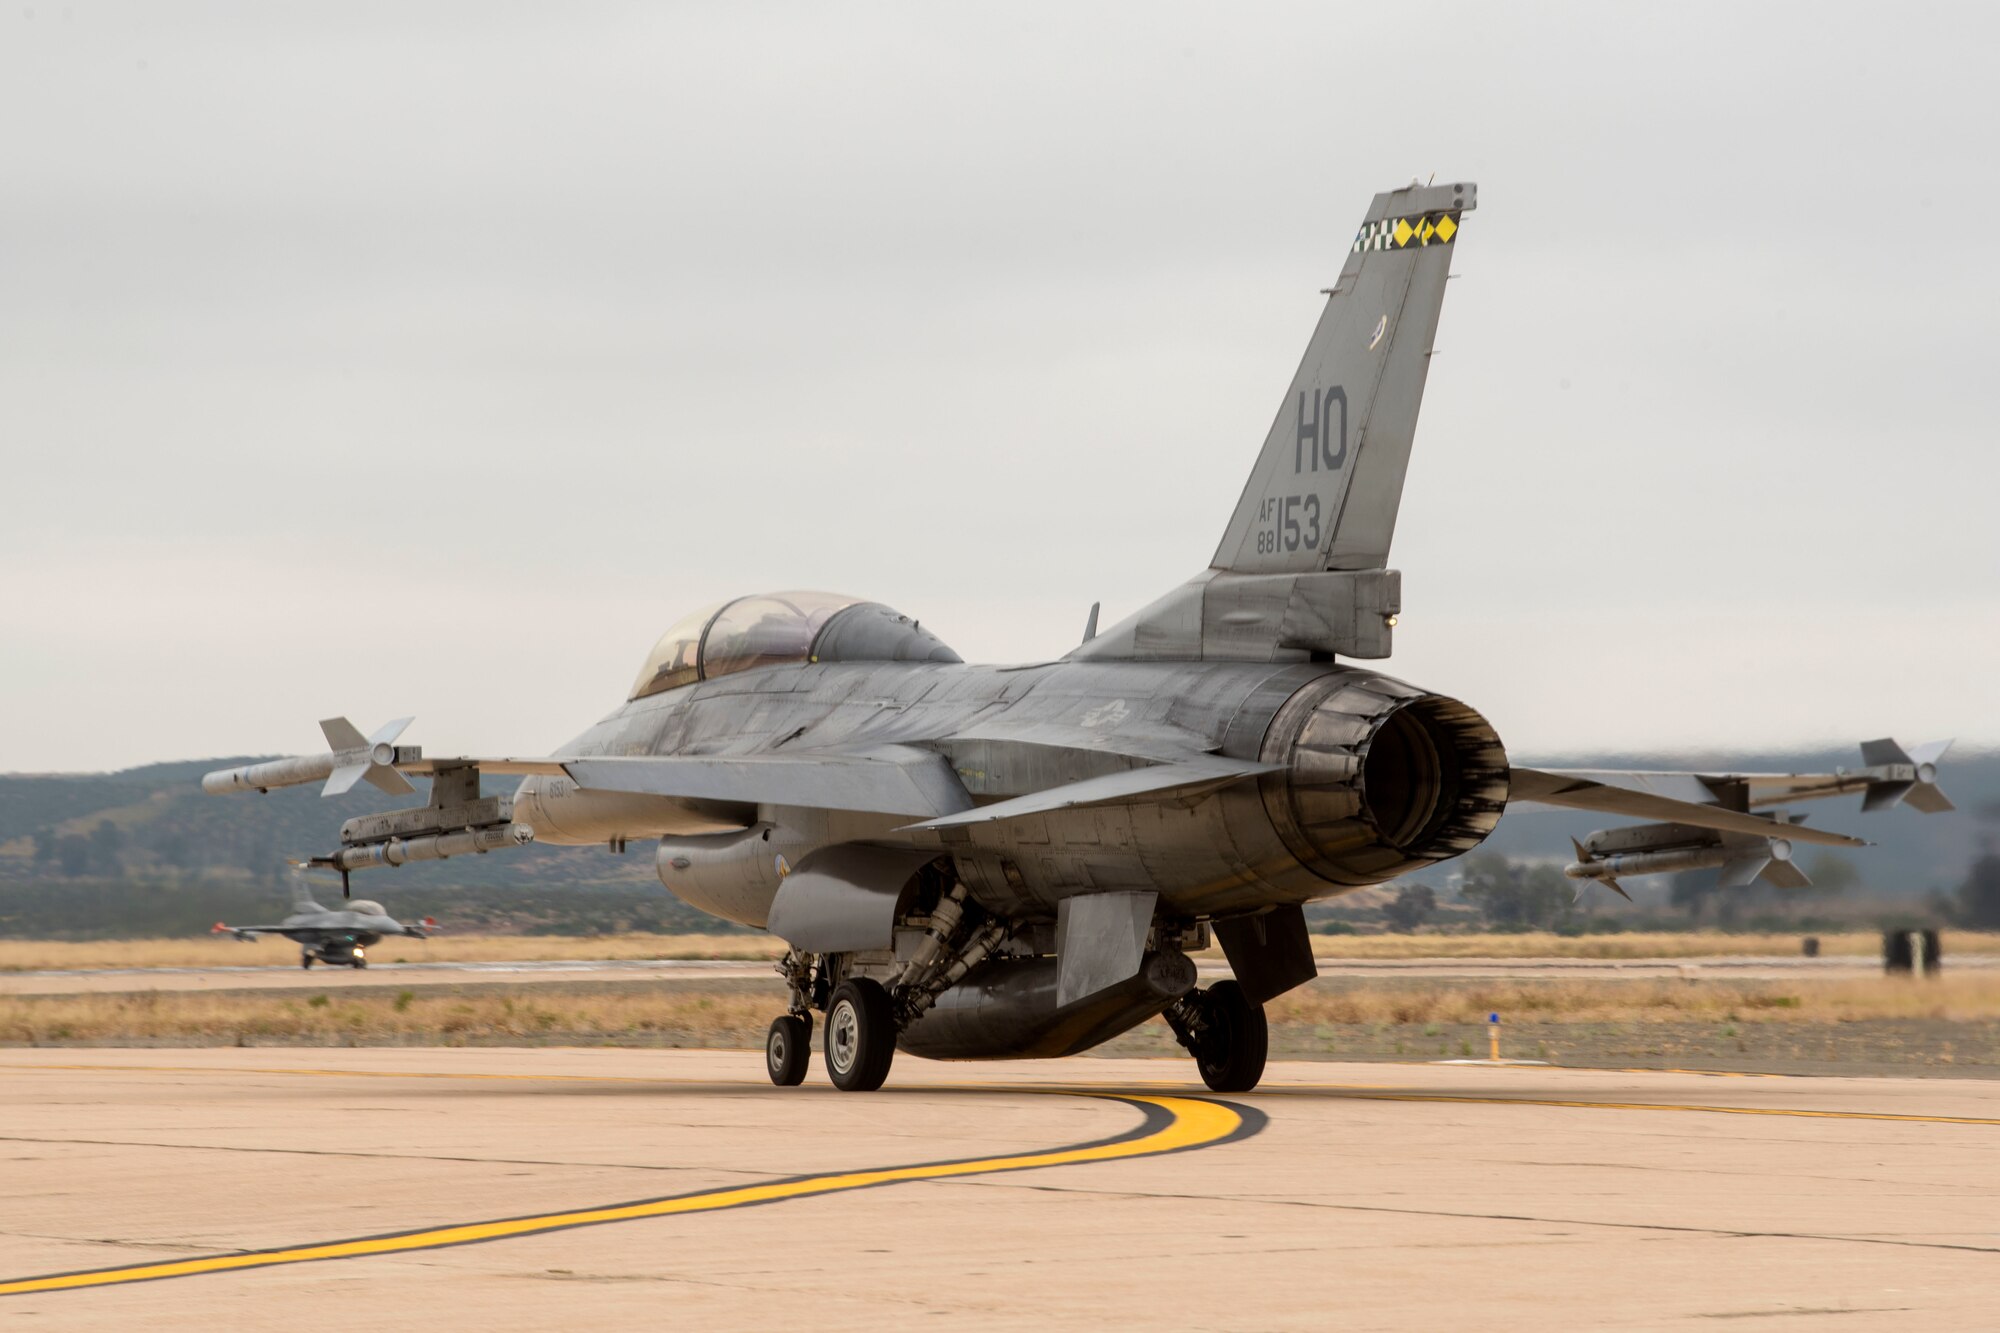 A 314th Fighter Squadron F-16 Viper taxis before takeoff June 4, 2019, on Marine Corps Air Station Miramar, Calif. While at the temporary duty location, the 314th FS conducted dissimilar air combat training with F/A-18 Hornets the Marine Fighter Attack Squadron 314. (U.S. Air Force photo by Staff Sgt. Christine Groening)